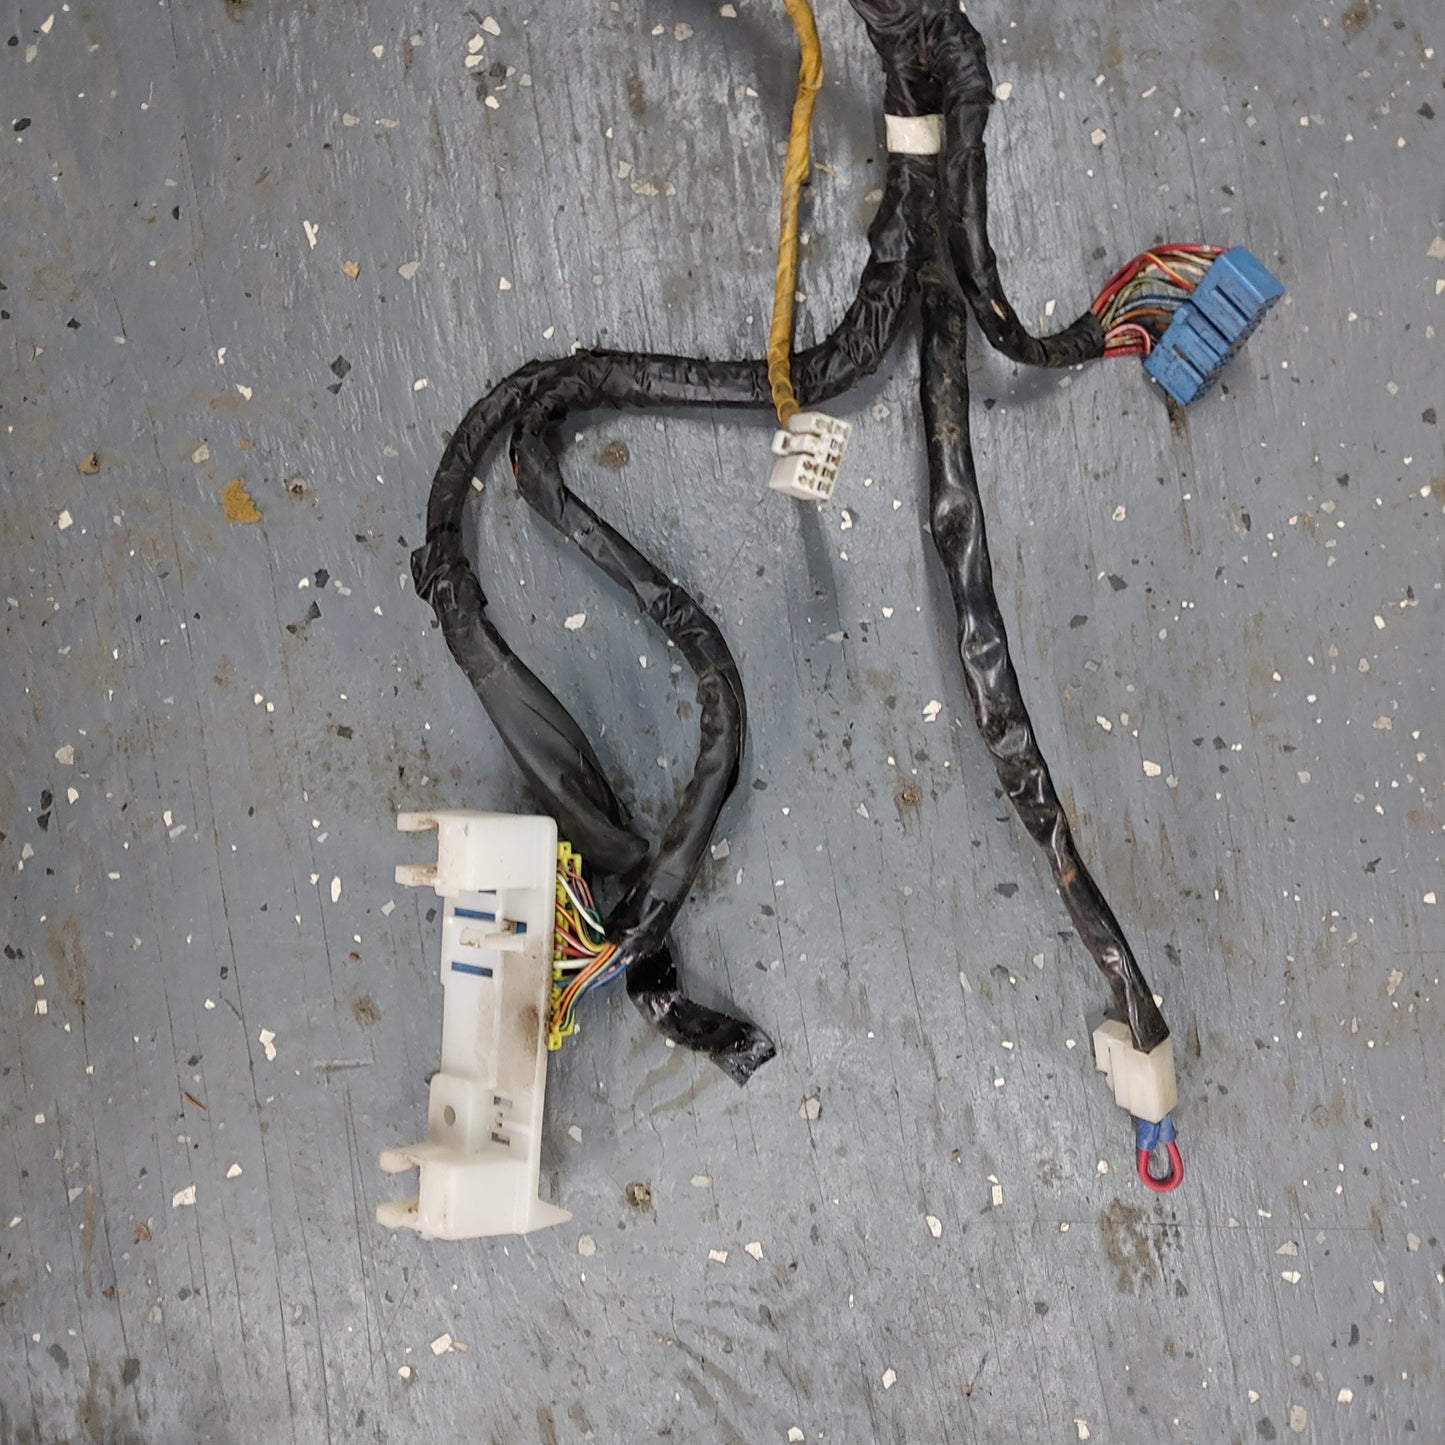 Manual Transmission Front Chassis Wire Wiring Harness FD15-67-010F RX7 FD FD3S 93 - 02 Mazda S4B0/116